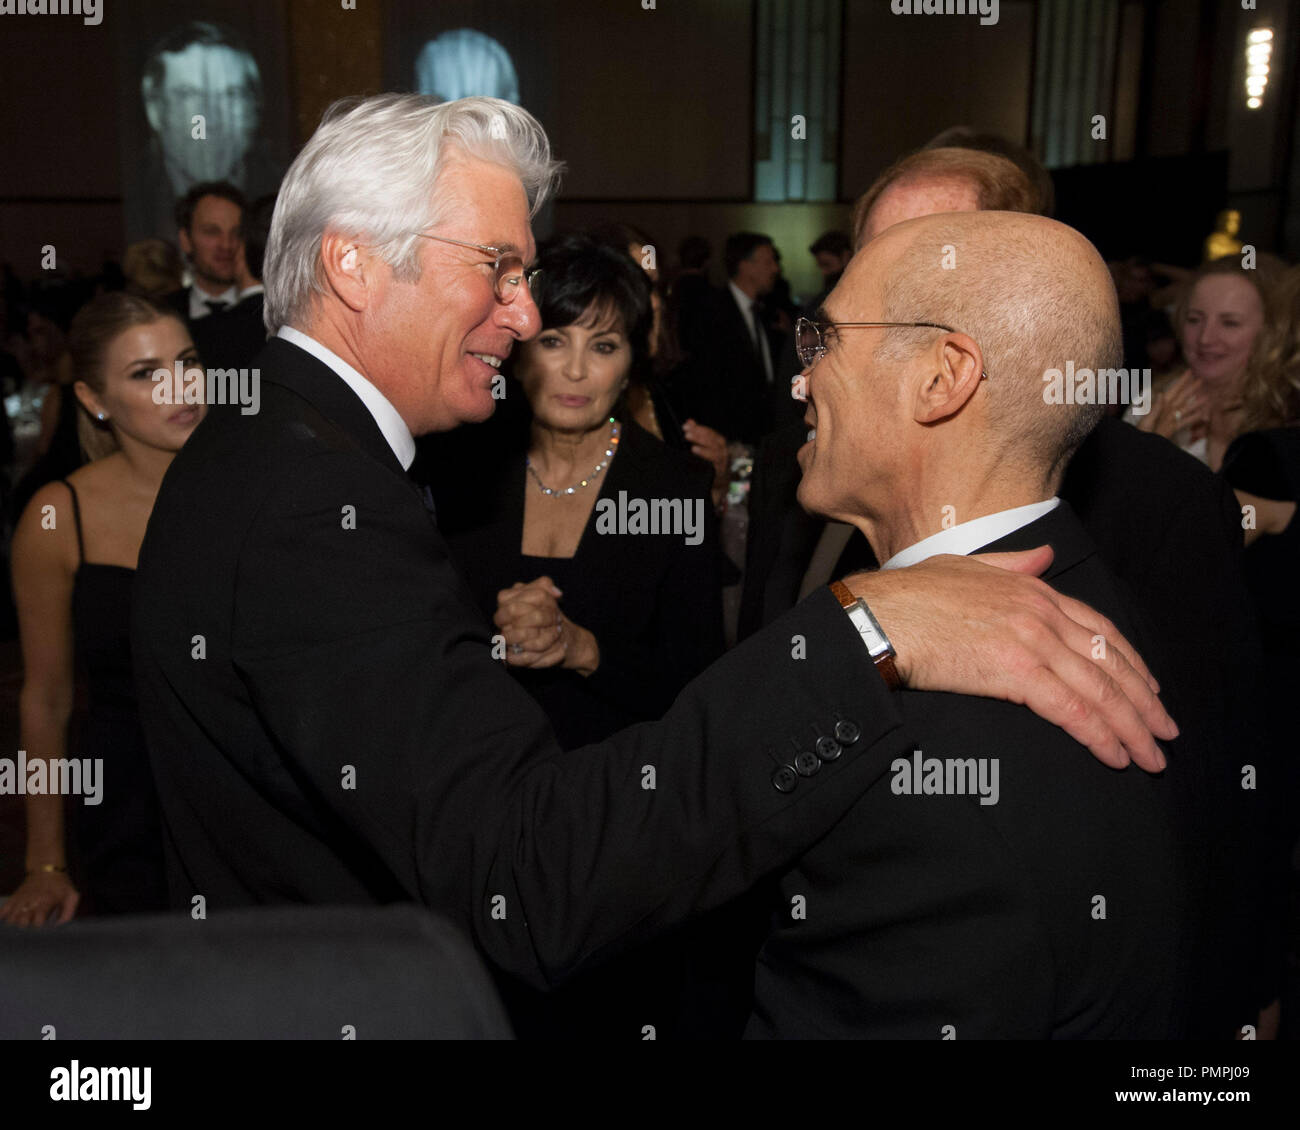 Actor Richard Gere (left) and Jean Hersholt Humanitarian Award recipient Jeffrey Katzenberg attend the 2012 Governors Awards at The Ray Dolby Ballroom at Hollywood & Highland Center® in Hollywood, CA, Saturday, December 1.  File Reference # 31744 049  For Editorial Use Only -  All Rights Reserved Stock Photo